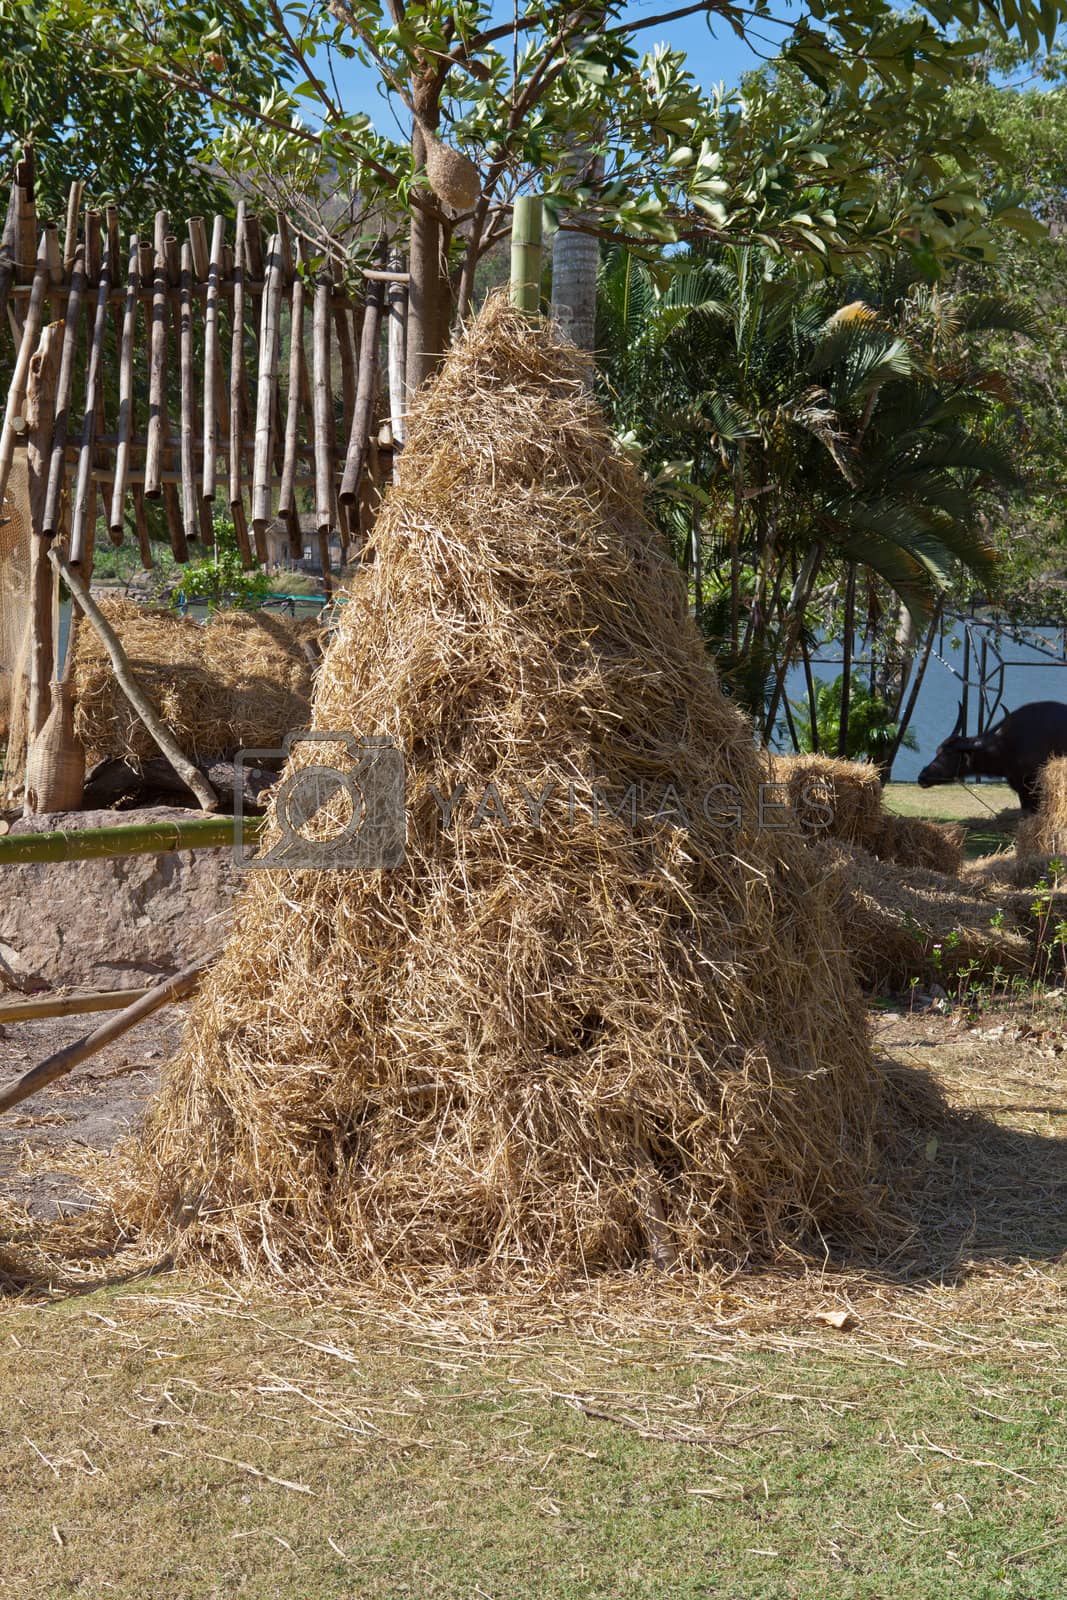 Royalty free image of Pile of rice straw by pinkblue